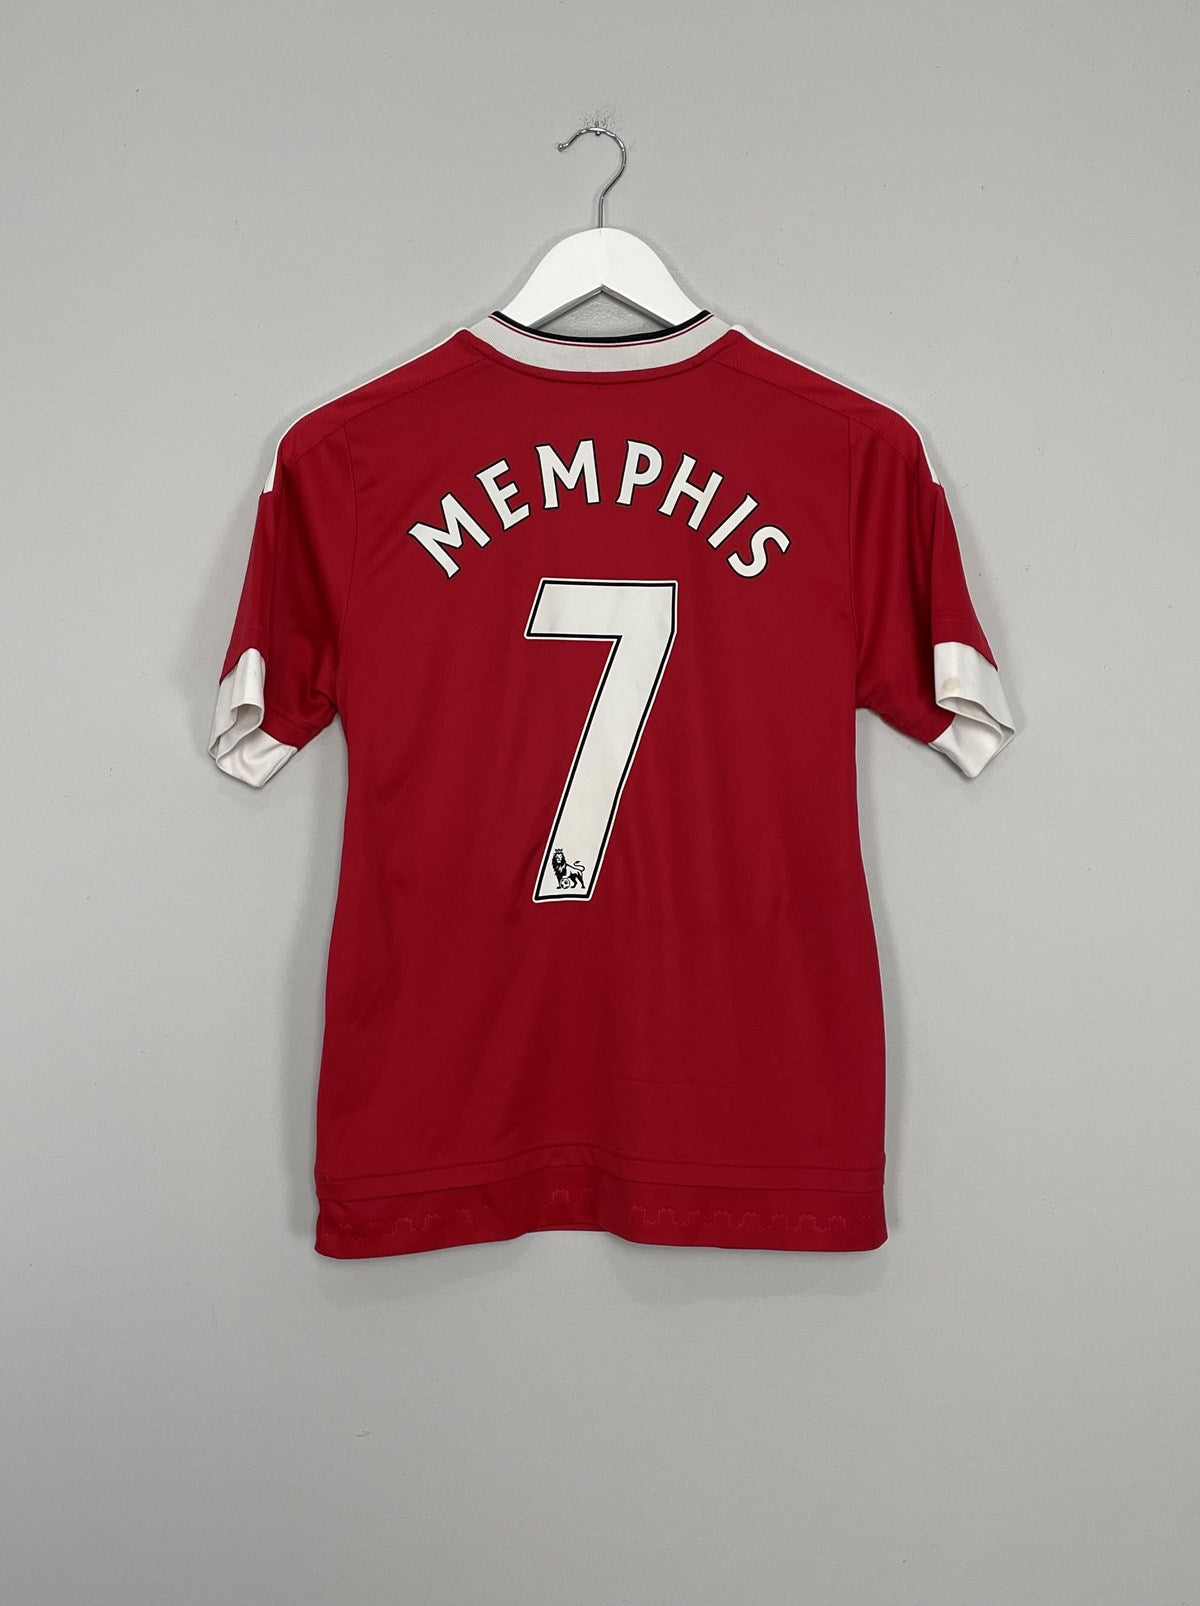 2015/16 MANCHESTER UNITED MEMPHIS #7 HOME SHIRT (L.YOUTH) ADIDAS